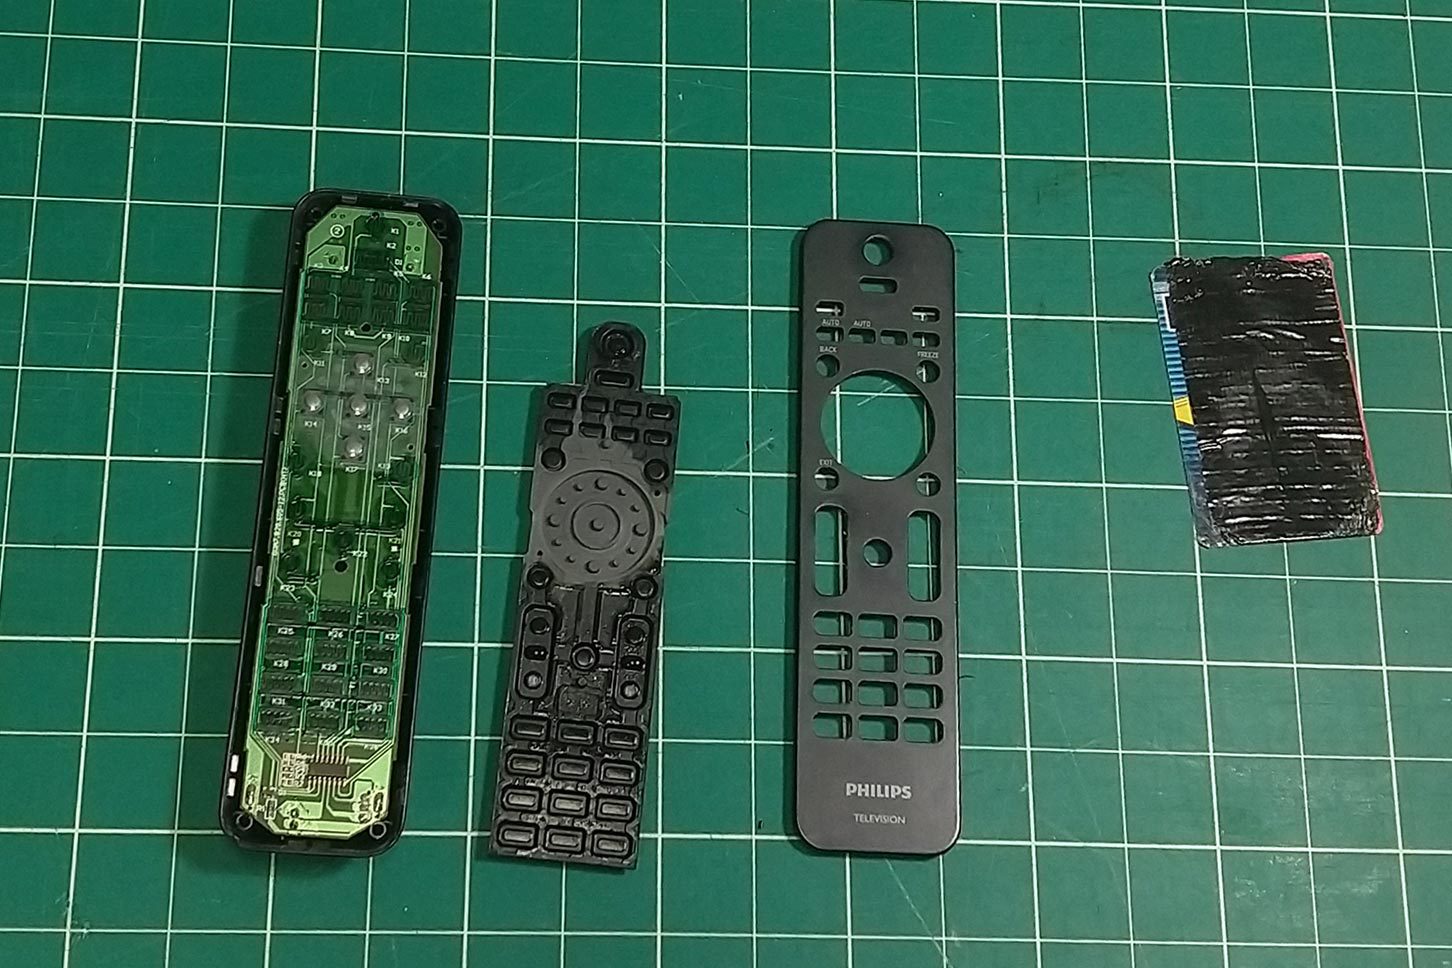 Opened up remote